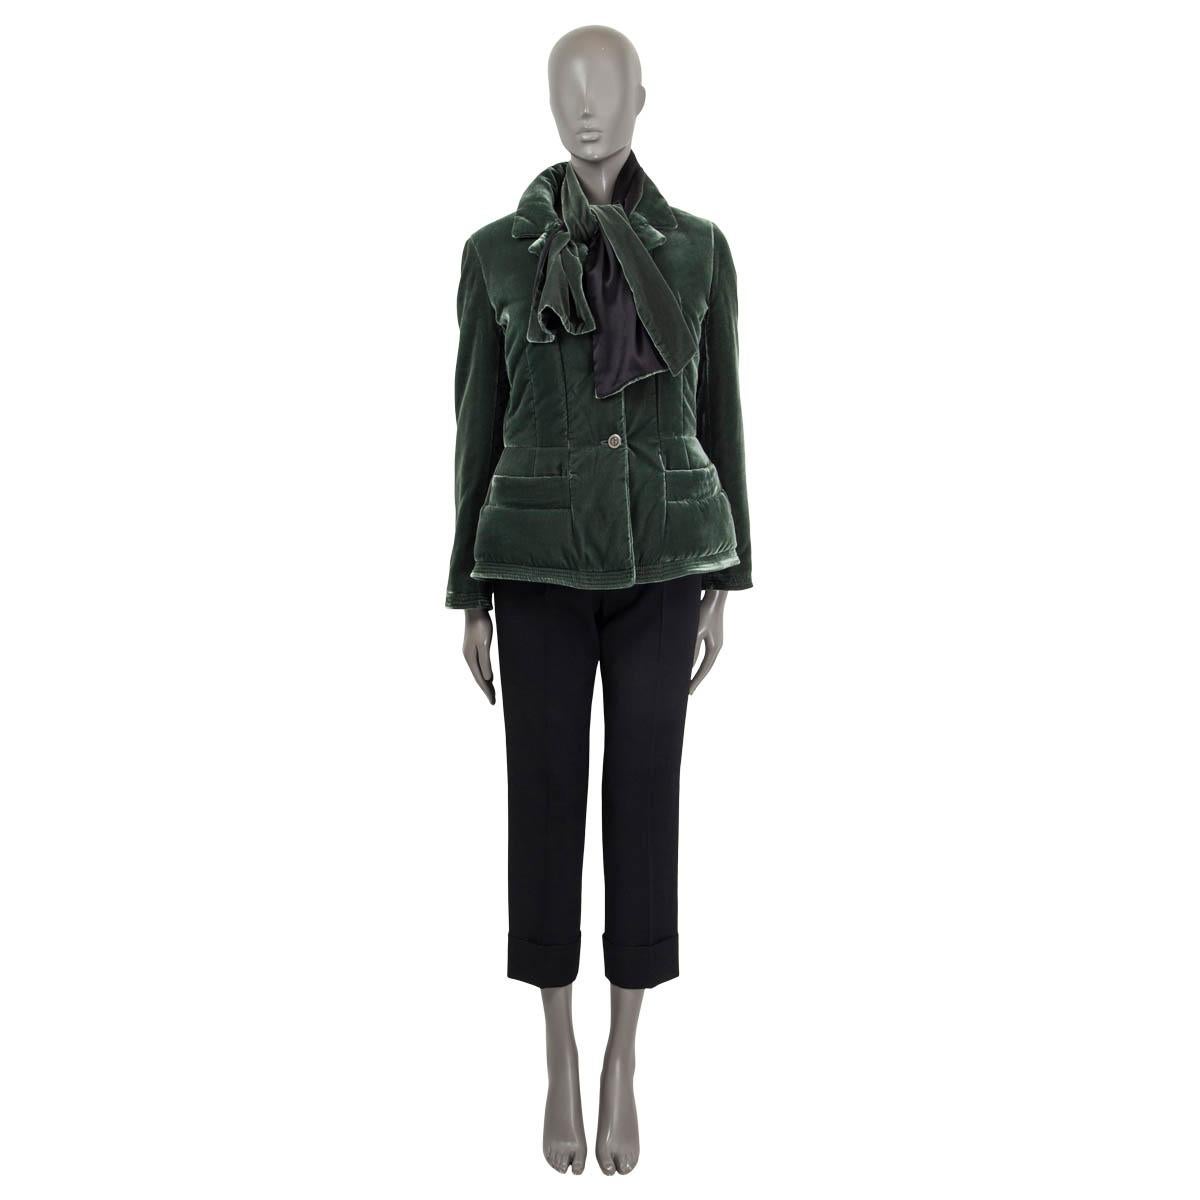 100% authentic Giorgio Armani quilted blazer jacket in green viscose (80%) and silk (20%). Features two slit pockets on the front. Opens with three silver buttons on the front. Lined in green silk (100%). Has been worn and is in excellent condition.